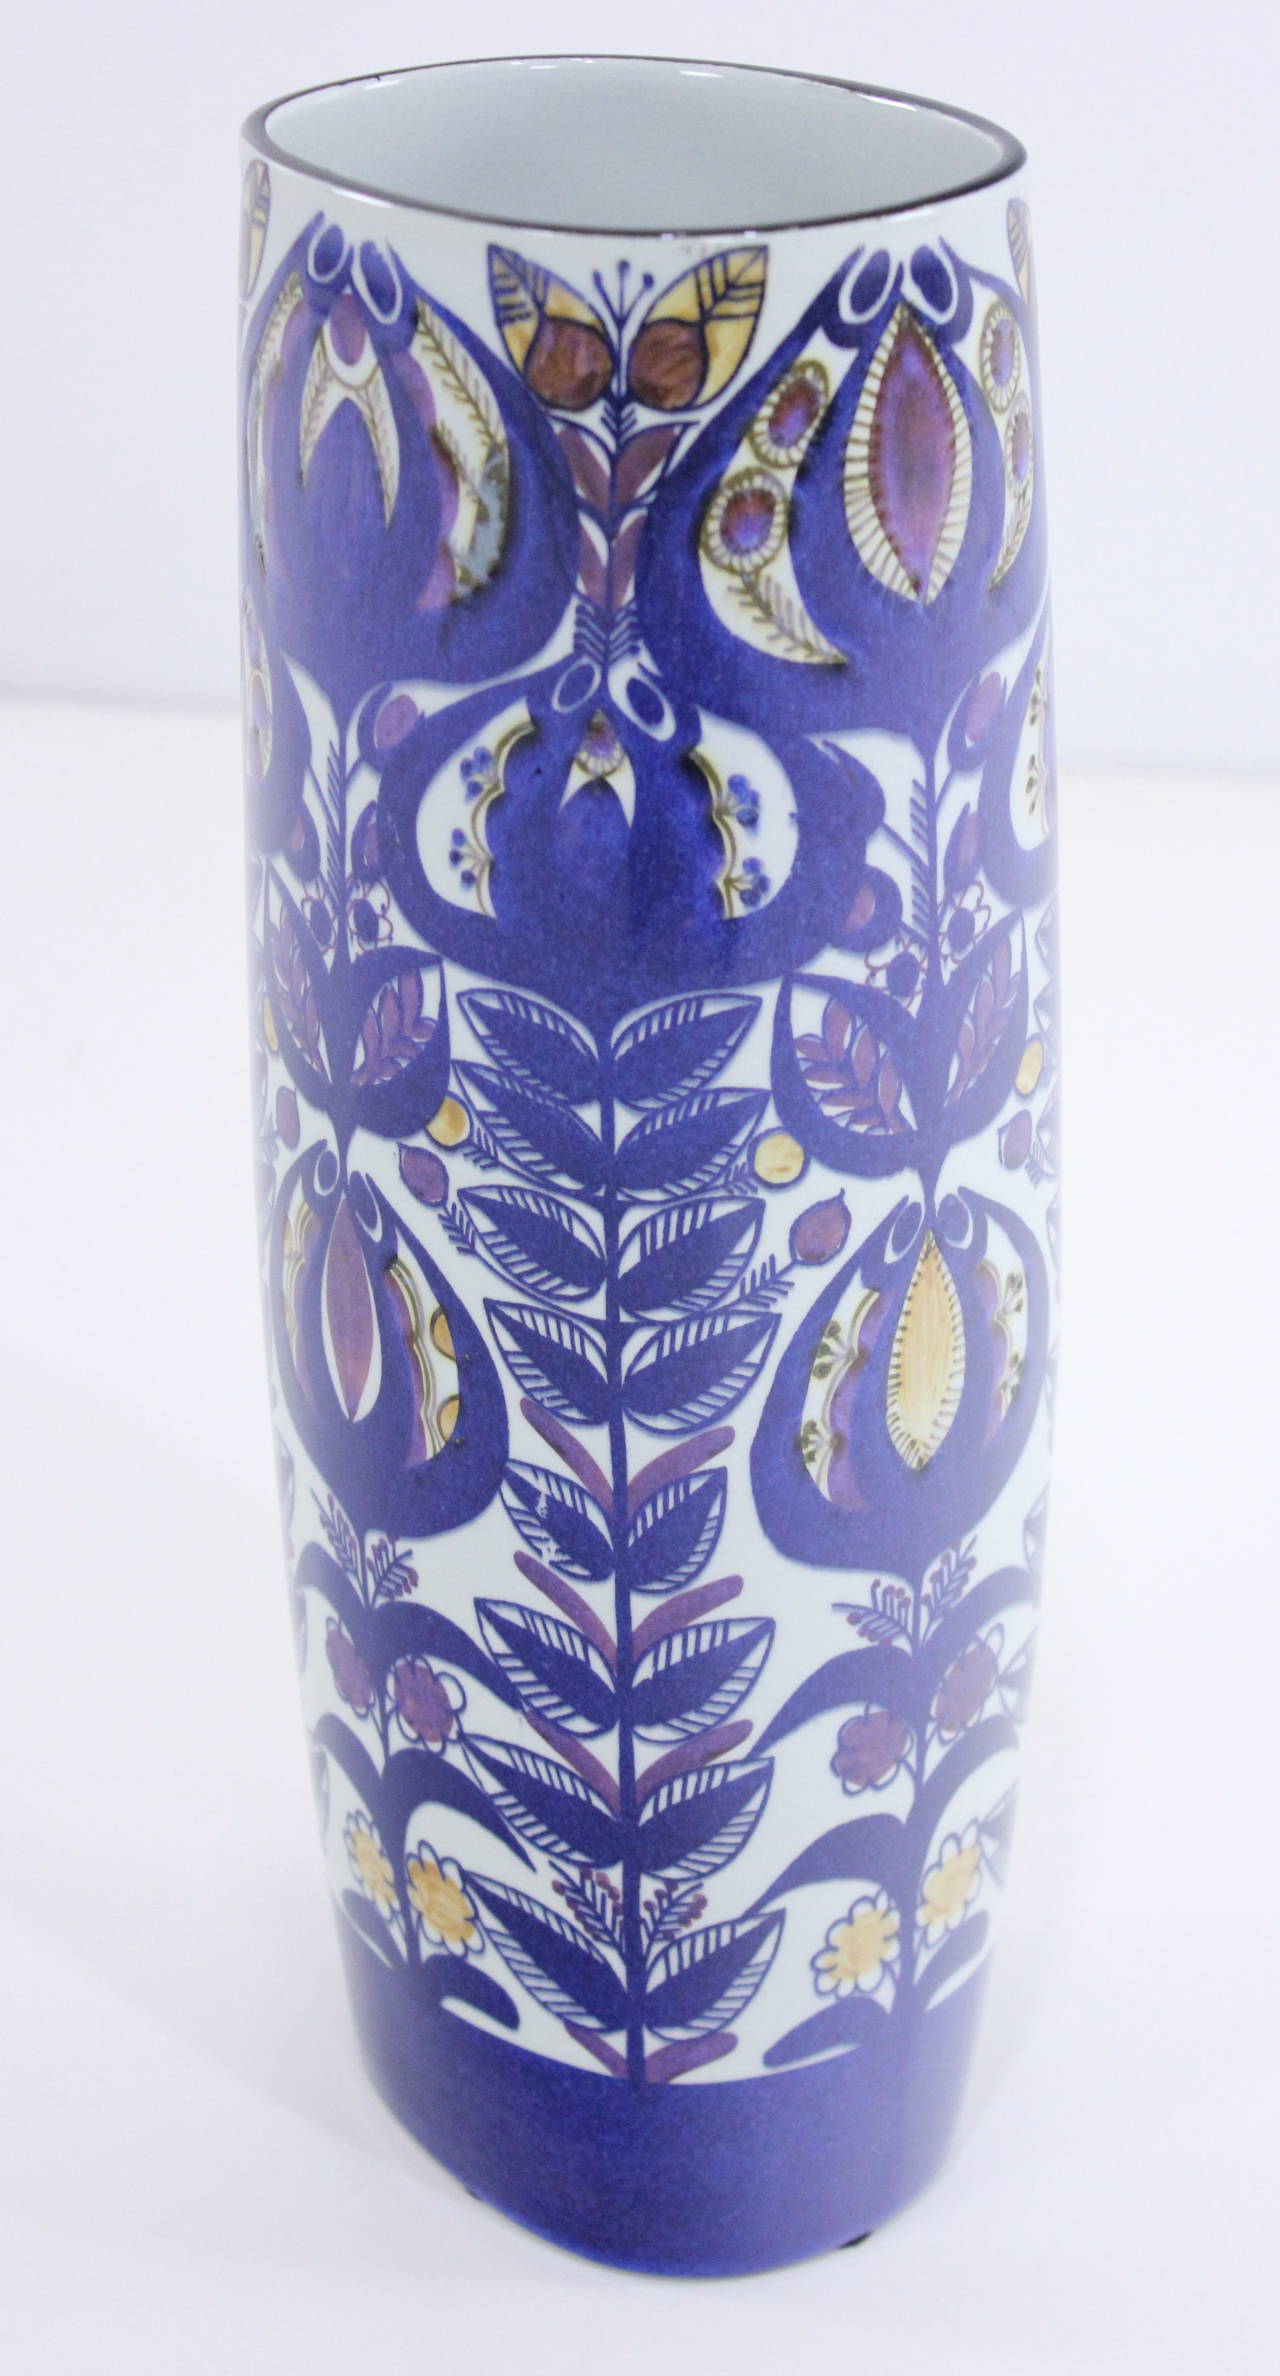 Danish modern limited edition vase designed by Berte Jesson for Royal Copenhagen.
Exceptional large size.
Faience, fine tin glazed pottery on a pale buff earthenware body.
Matchless quality and price.
Low freight, quick ship.